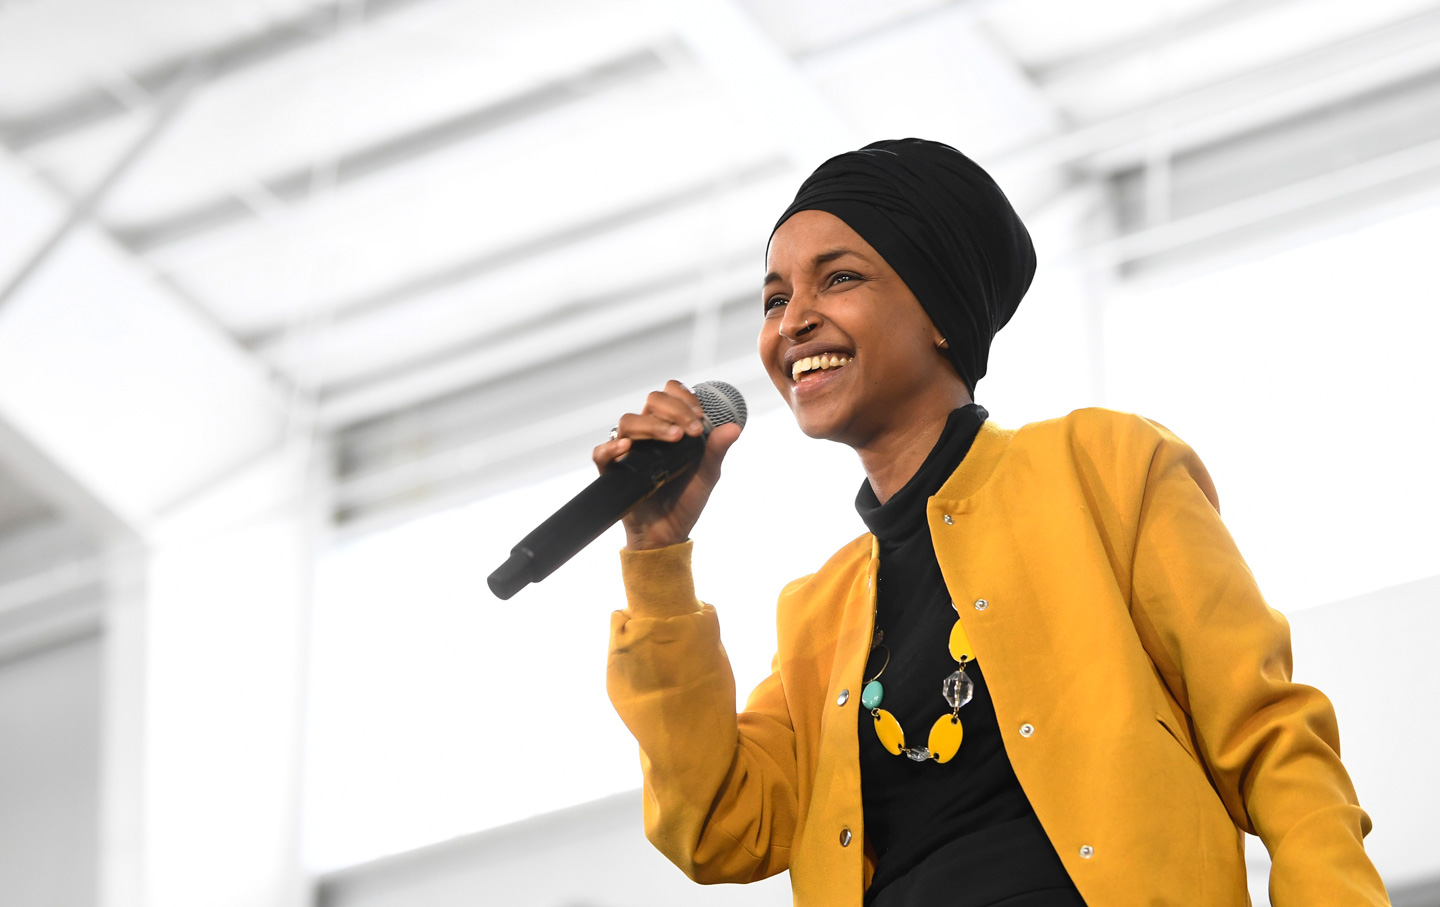 Ilhan Omar Faces a Primary Tuesday Because She Speaks Truth to Power